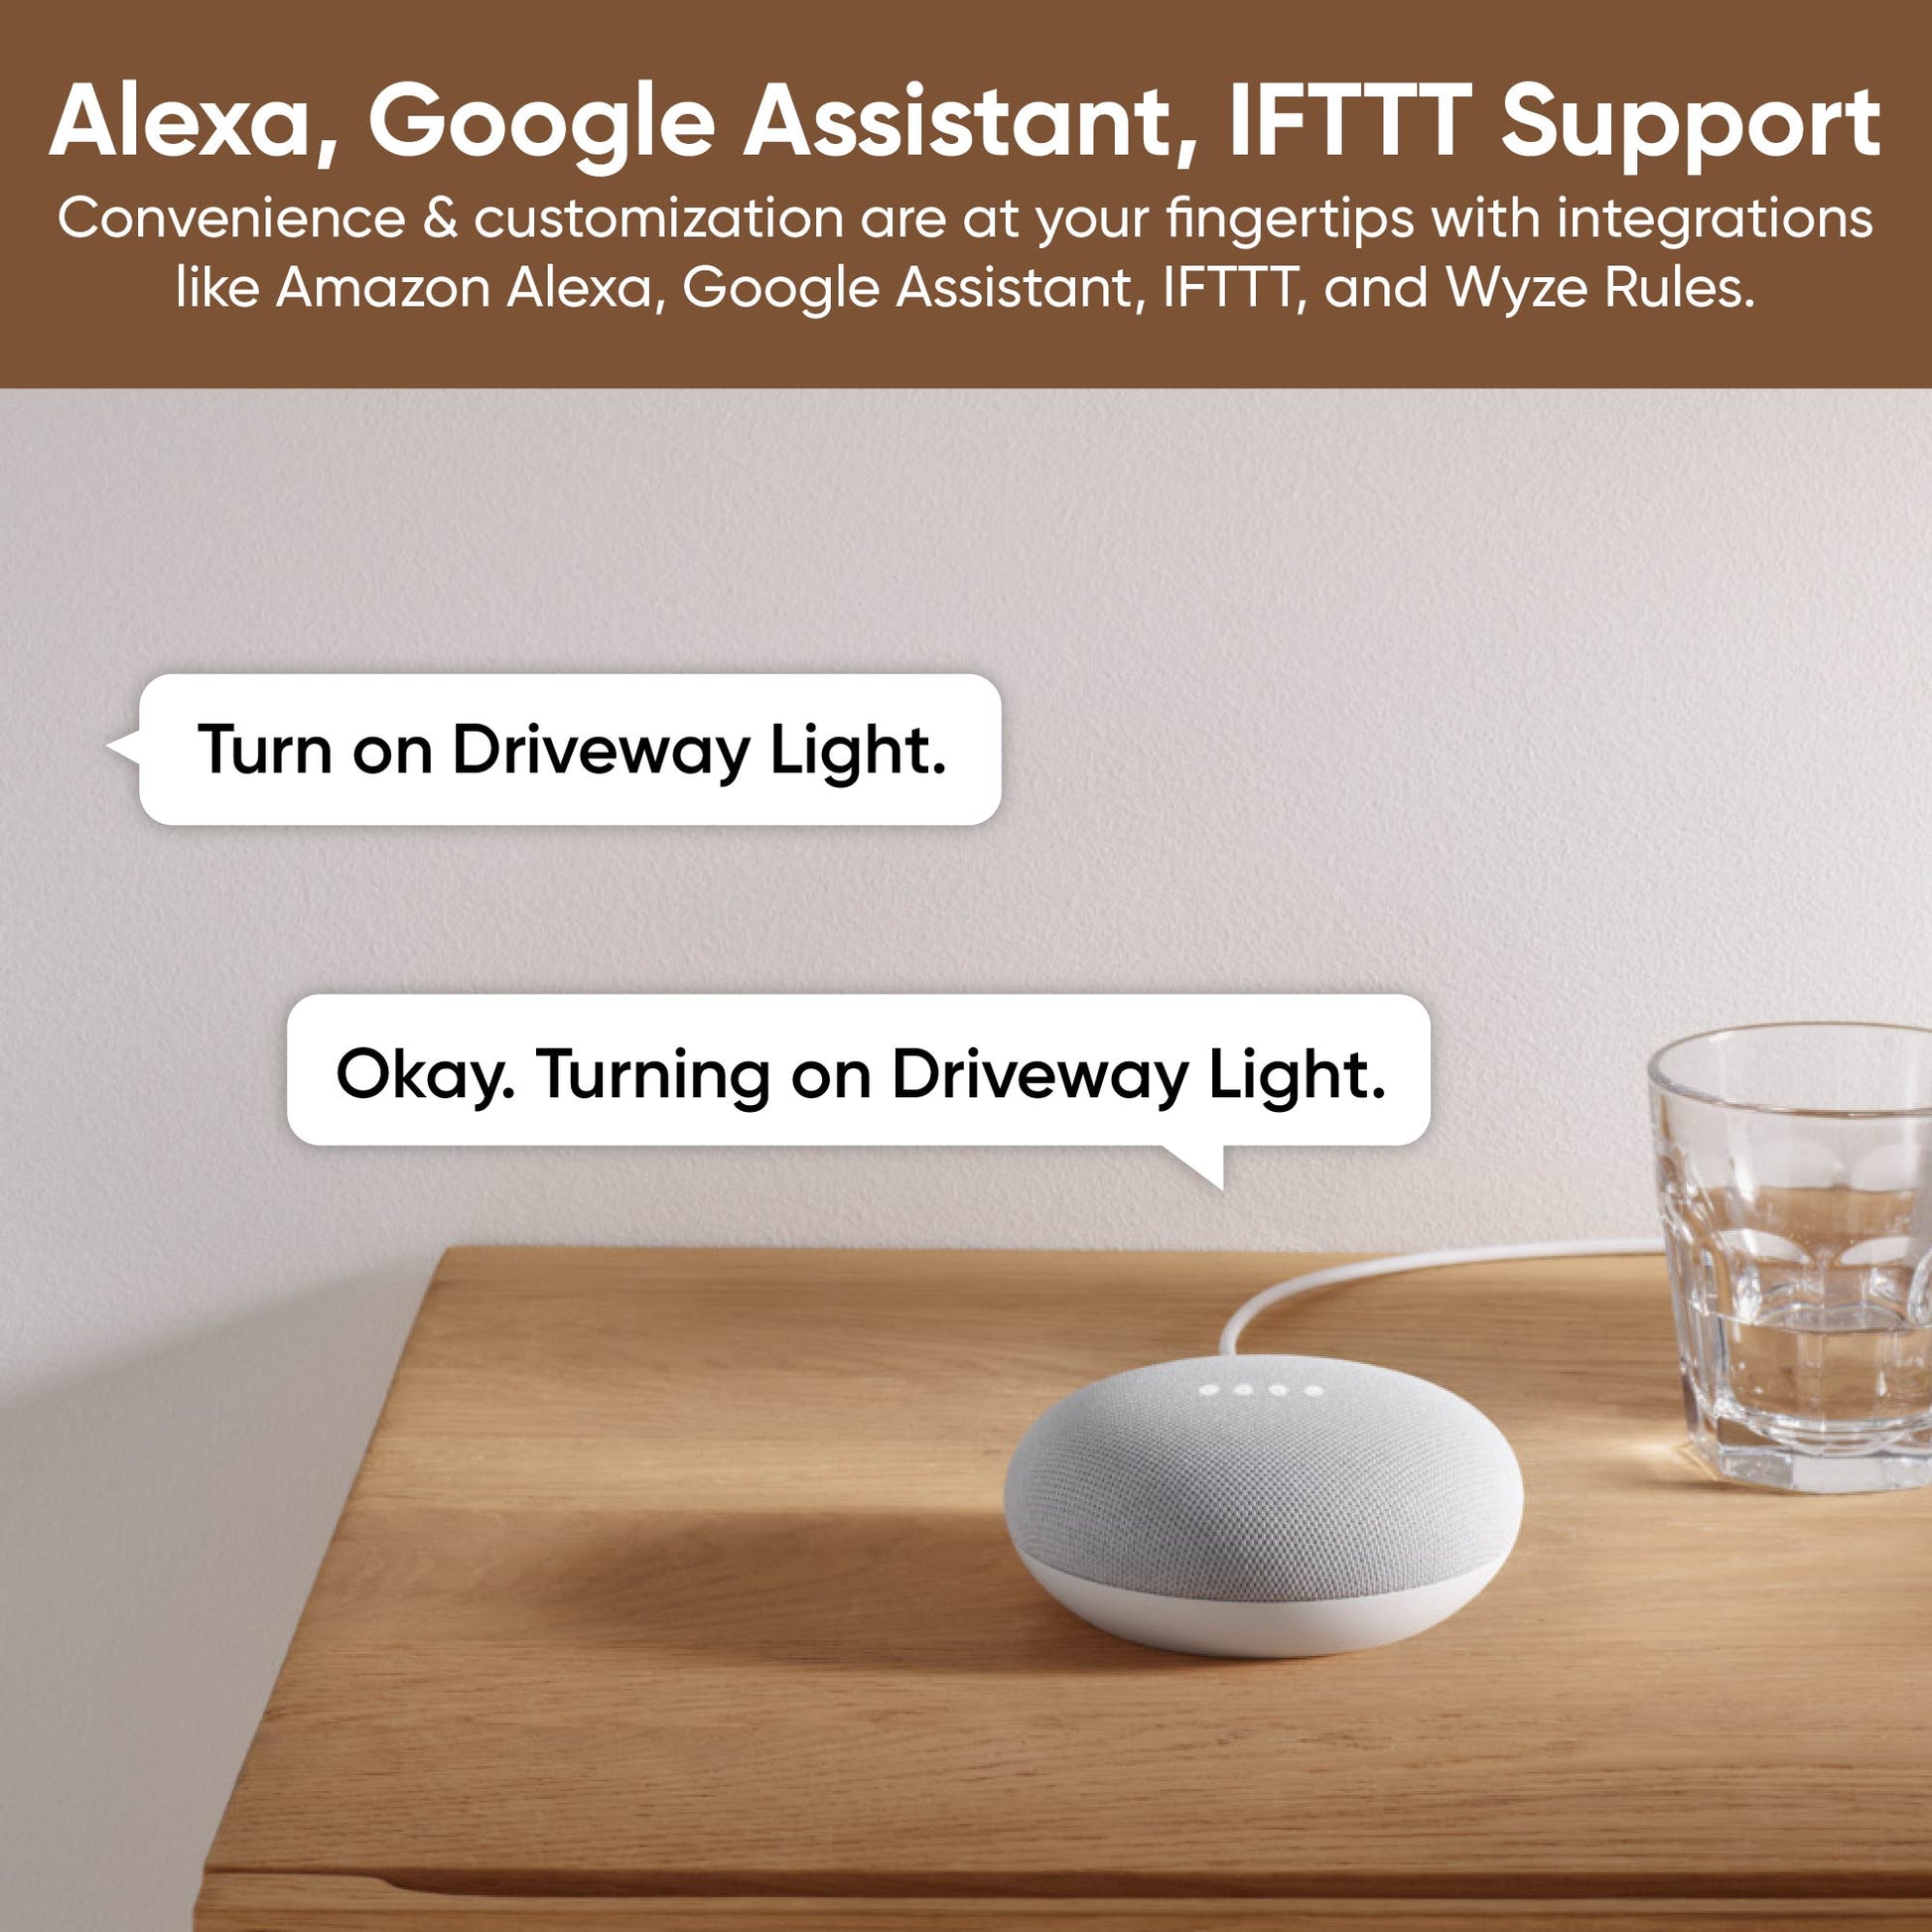 Google Nest Mini on table as it receives a voice command to turn on driveway light